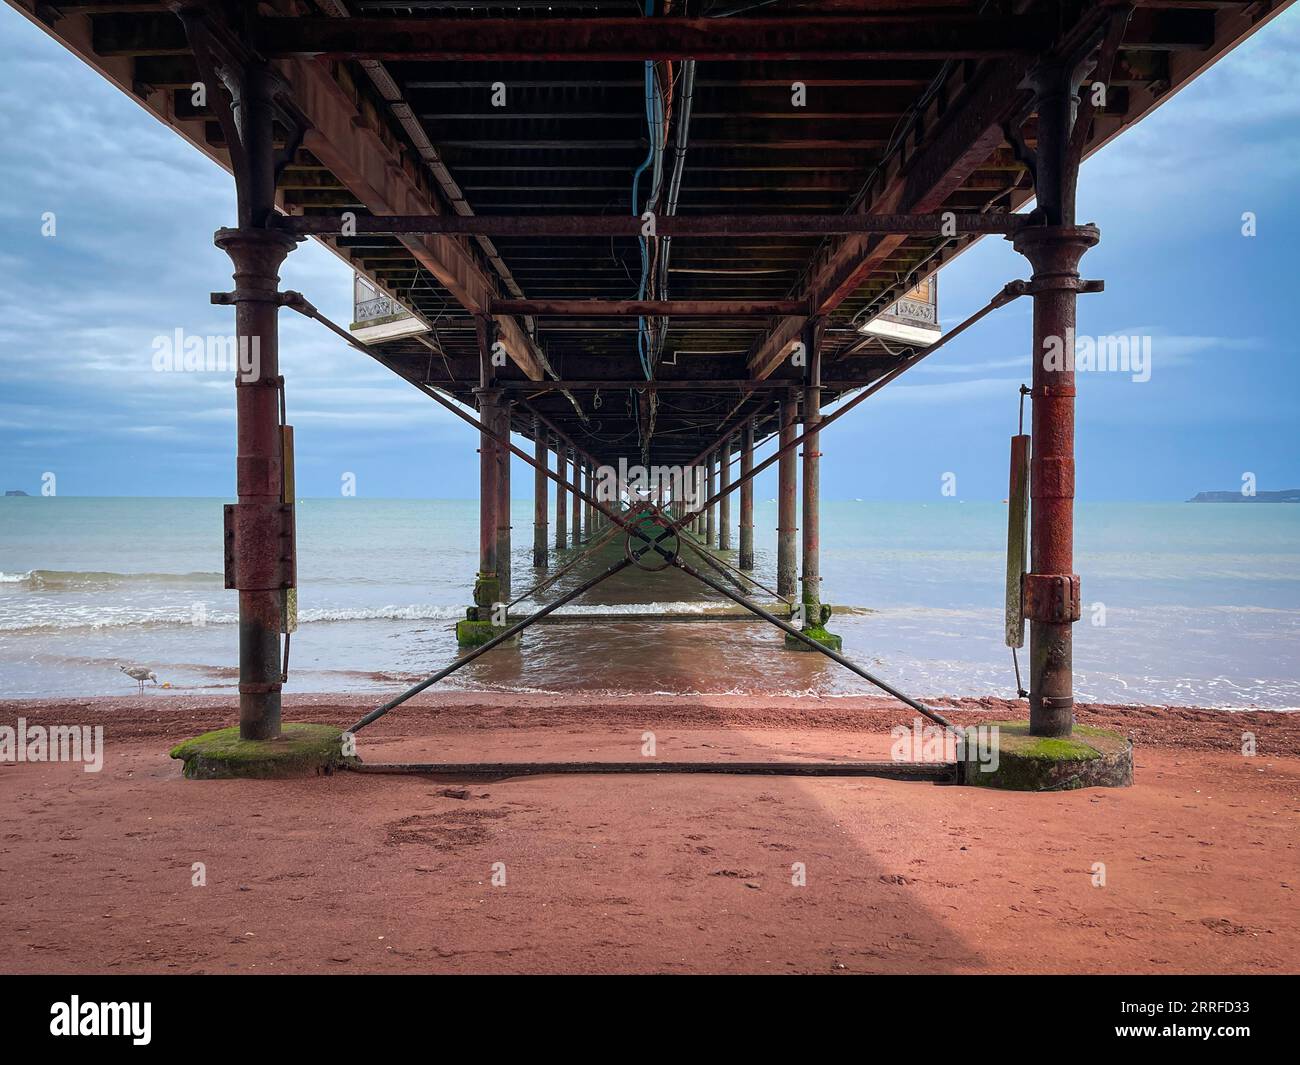 Paignton Pier viewed from Below Stock Photo